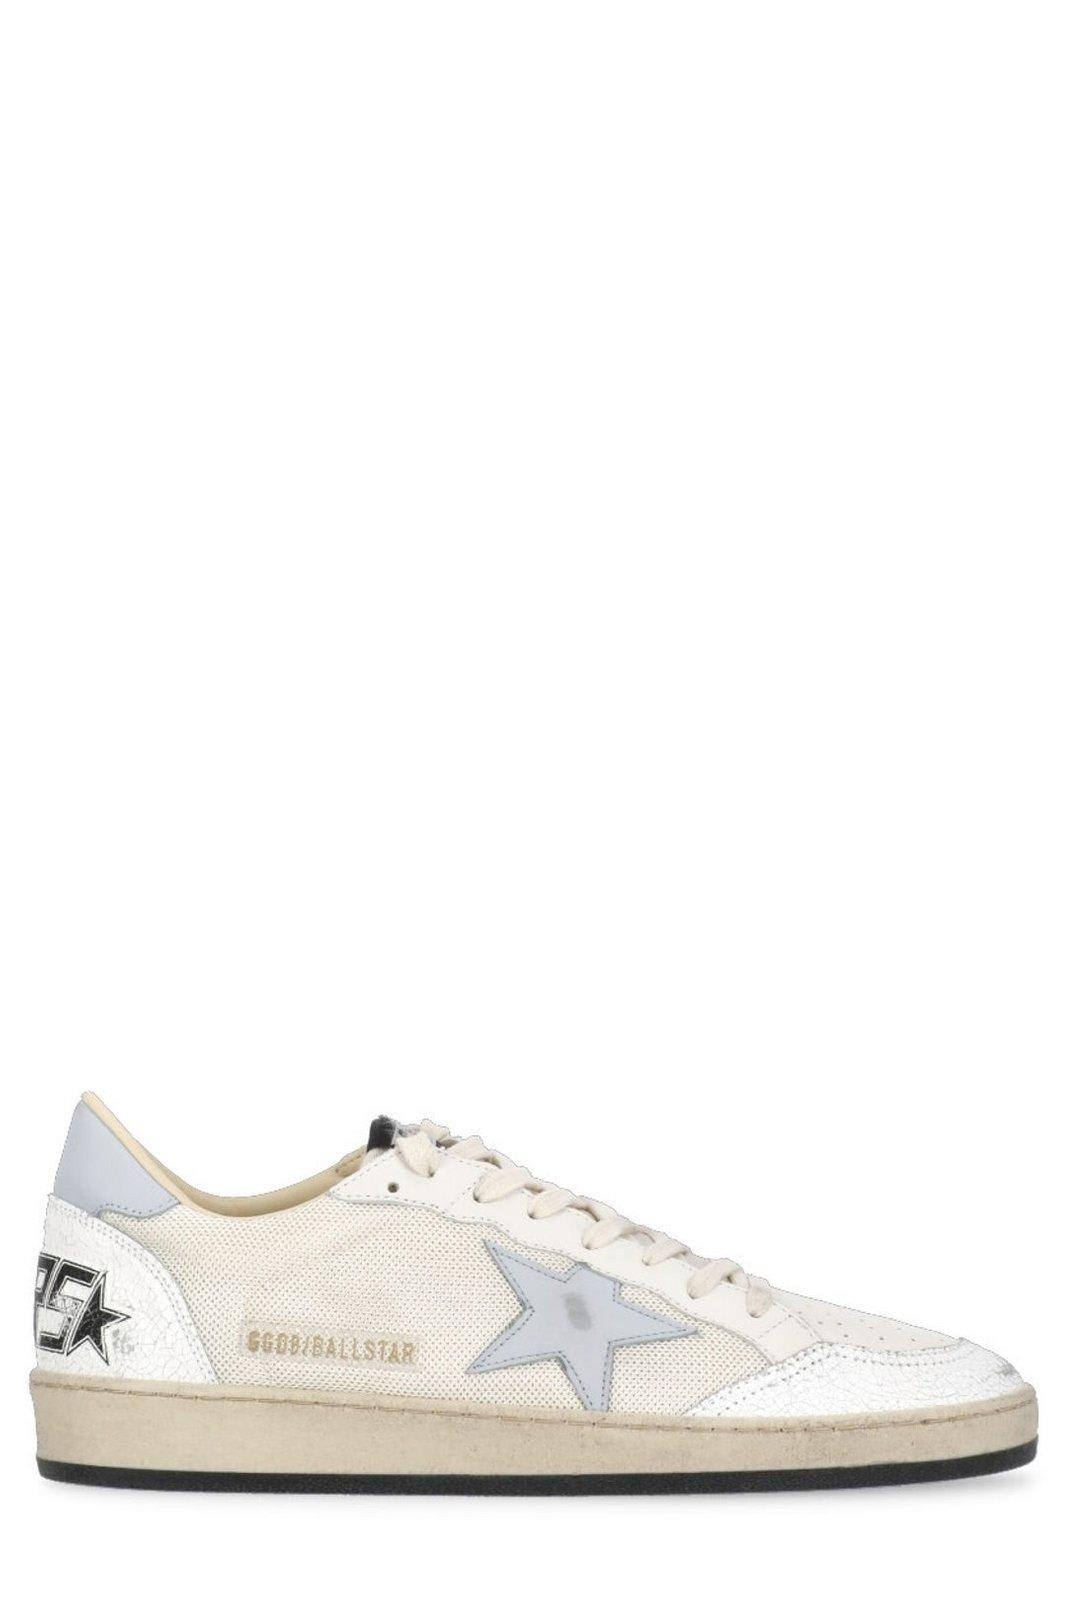 Golden Goose Star Patch Lace-up Sneakers In White/cream/ Gray